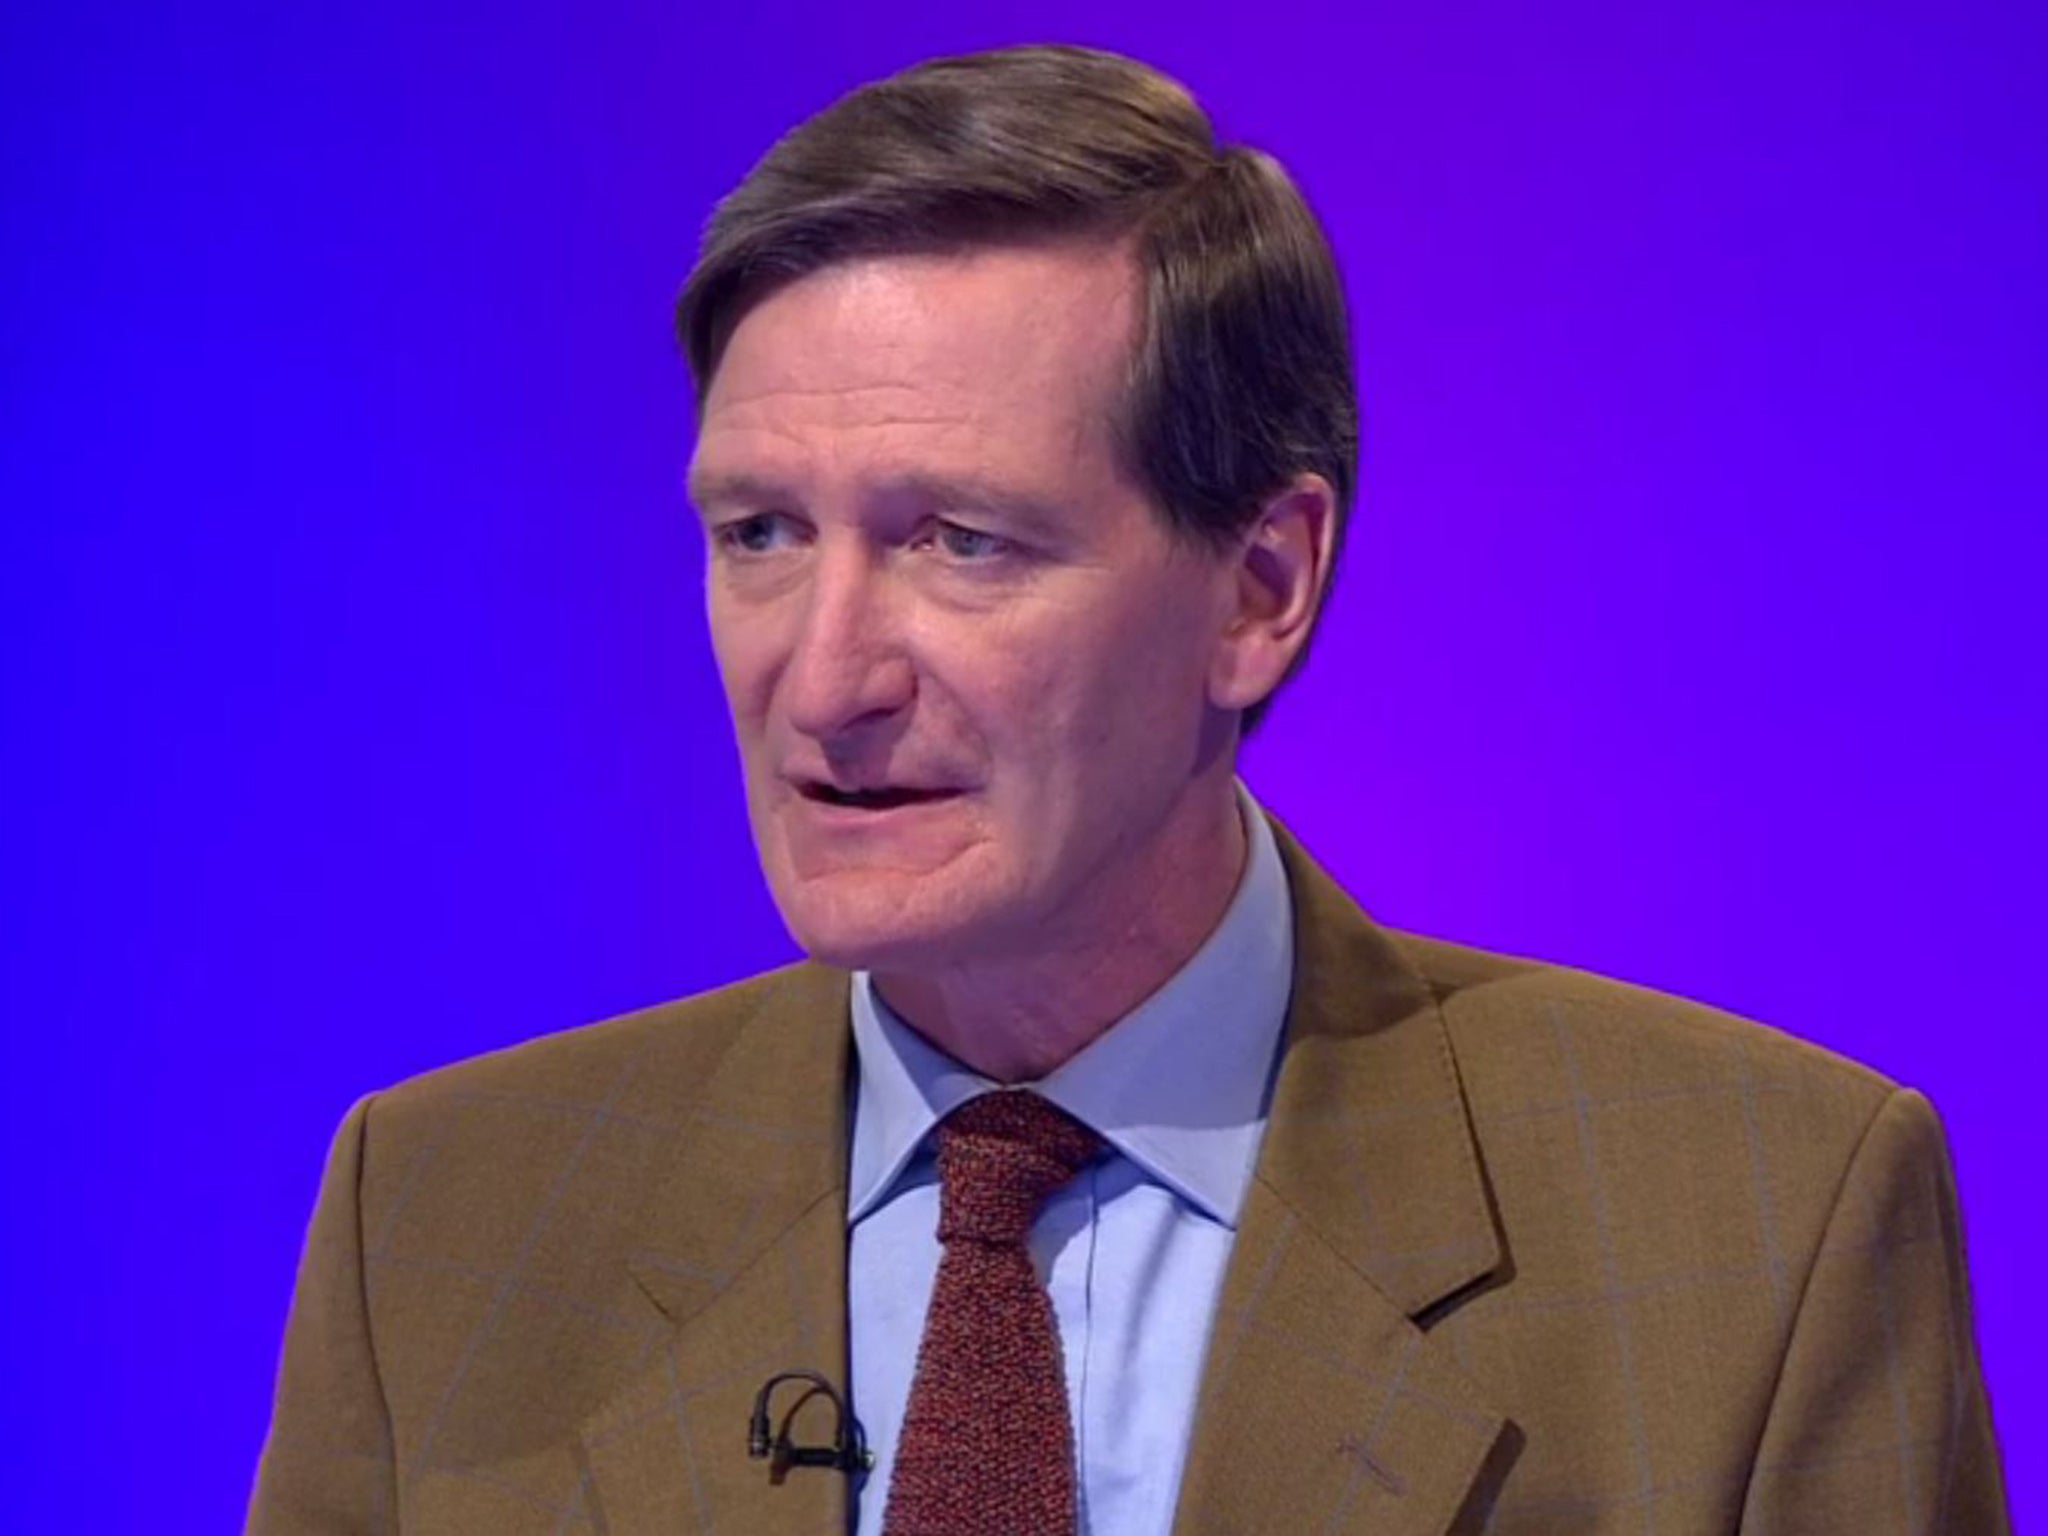 Former Conservative Attorney General Dominic Grieve said Brexit could do 'appalling damage' to 'economic well-being and the quality of life'